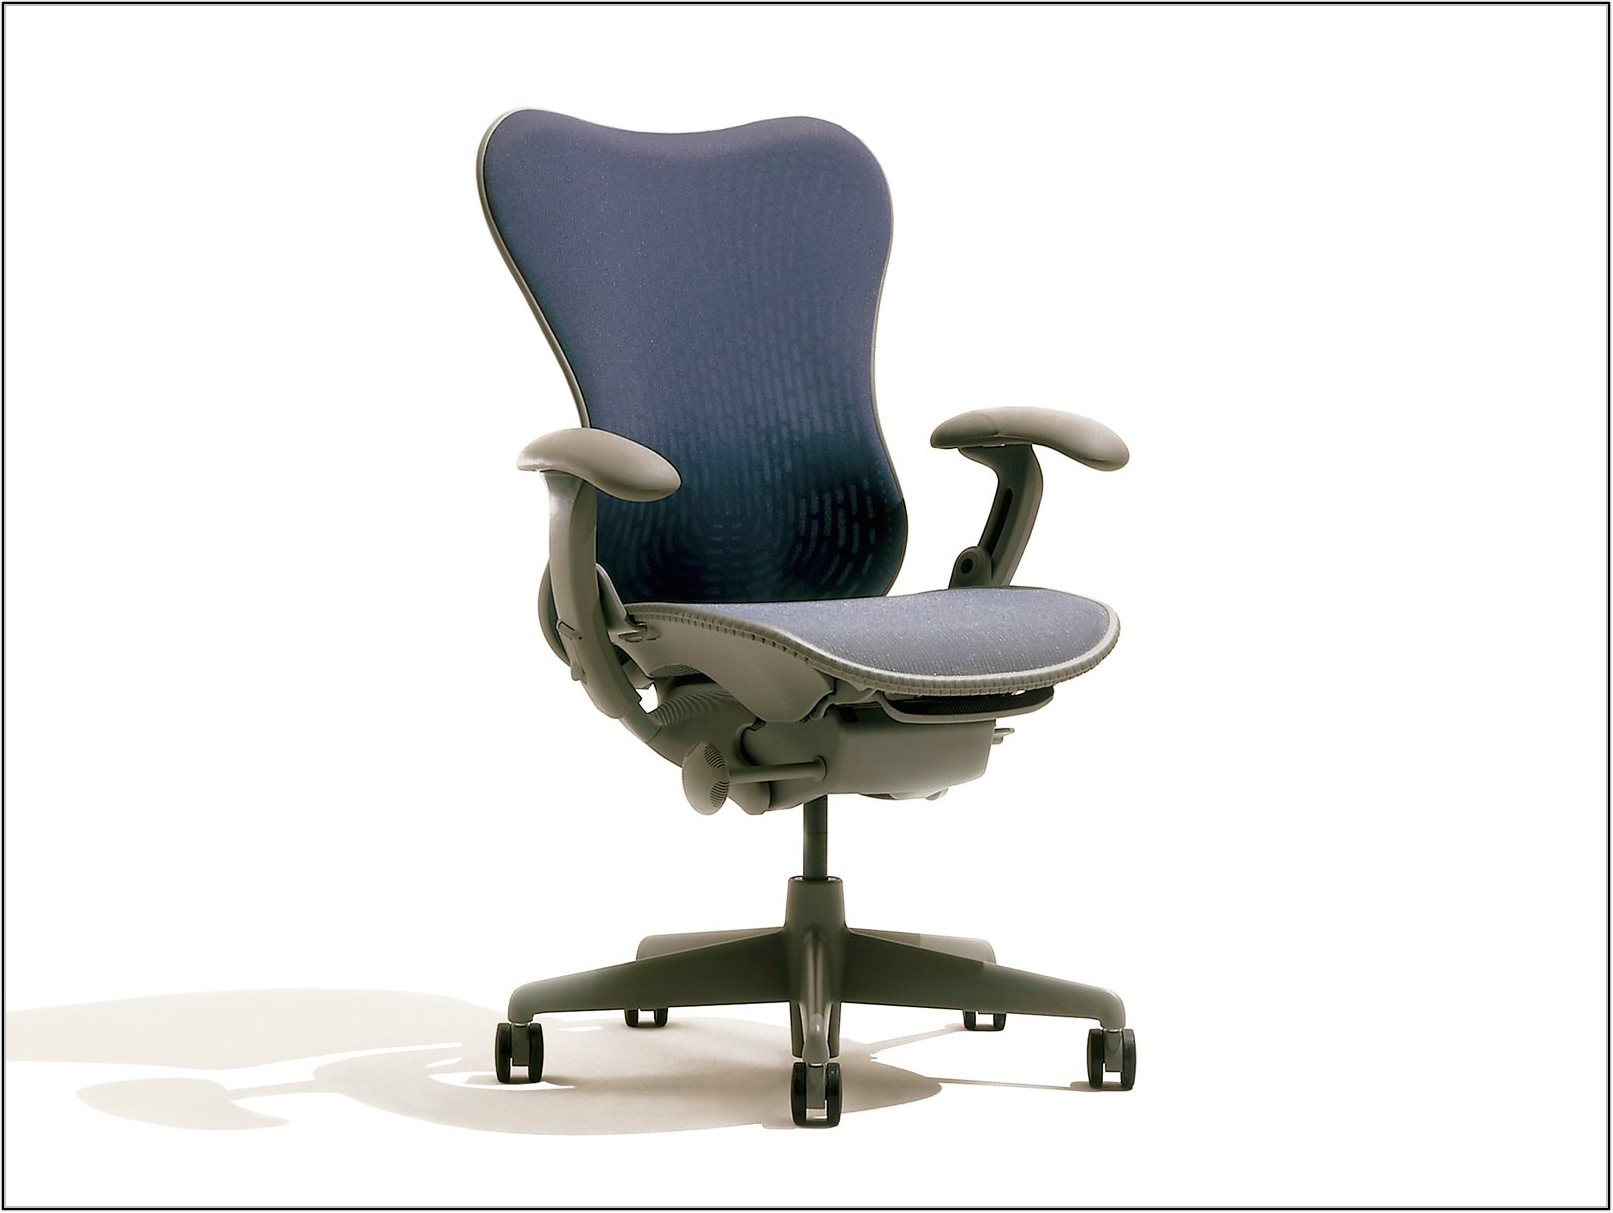 Herman Miller Office Chairs Toronto - Chairs : Home Design Ideas #